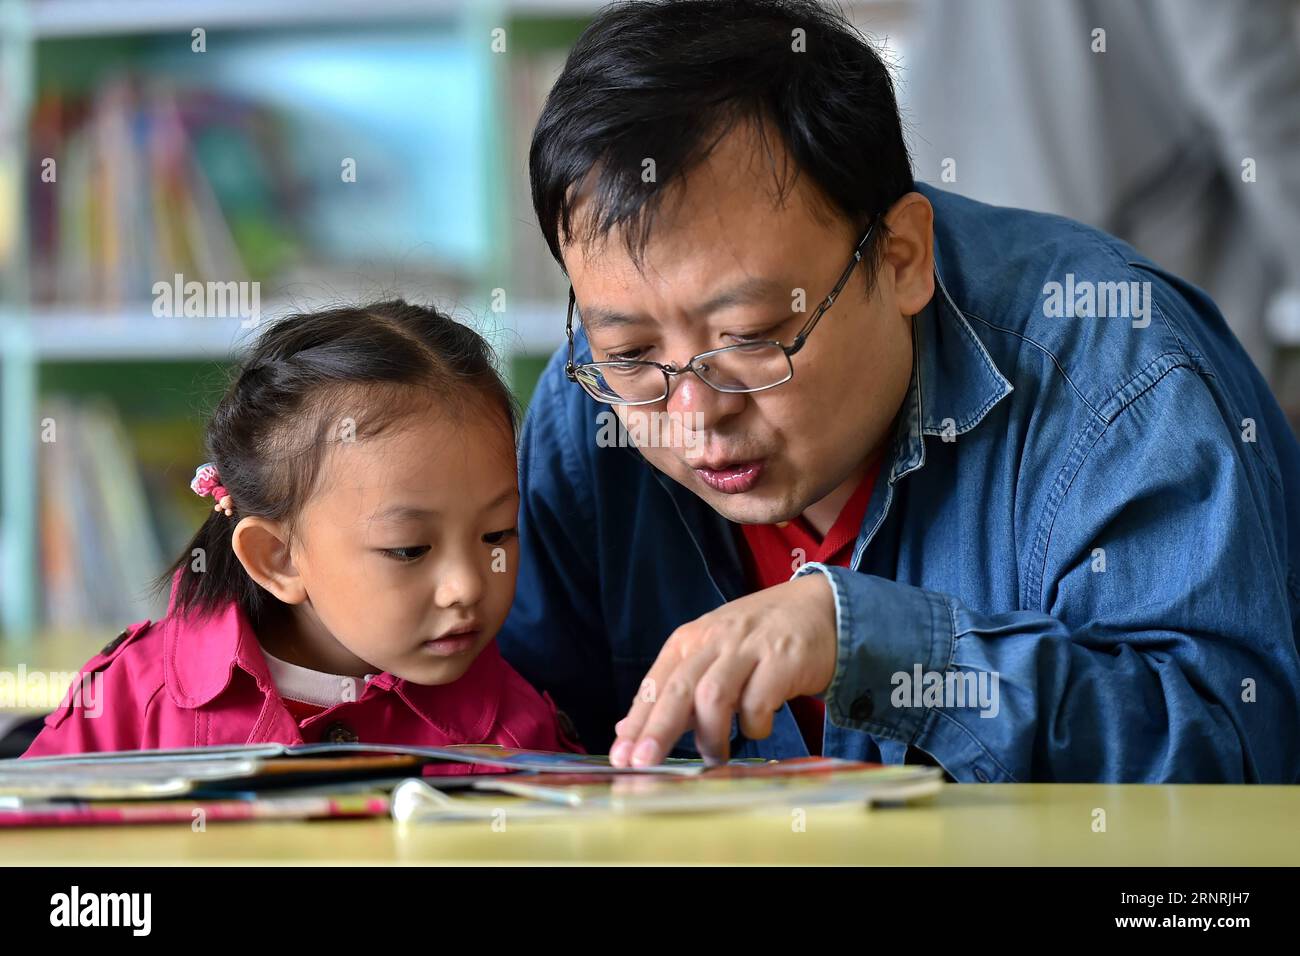 (171004) -- TAIYUAN, Oct. 4, 2017 -- Citizens read books at a library during the holiday for the National Day and the Mid-Autumn Festival at Taiyuan, north China s Shanxi Province, Oct. 4, 2017. This year s Mid-Autumn Festival falls on Oct. 4. Mid-Autumn Festival, the 15th day of the eighth month on China s lunar calendar, is an occasion for family gatherings and well-known as the time to eat mooncakes. )(wsw) CHINA-MID-AUTUMN FESTIVAL-CELEBRATION (CN) CaoxYang PUBLICATIONxNOTxINxCHN Stock Photo